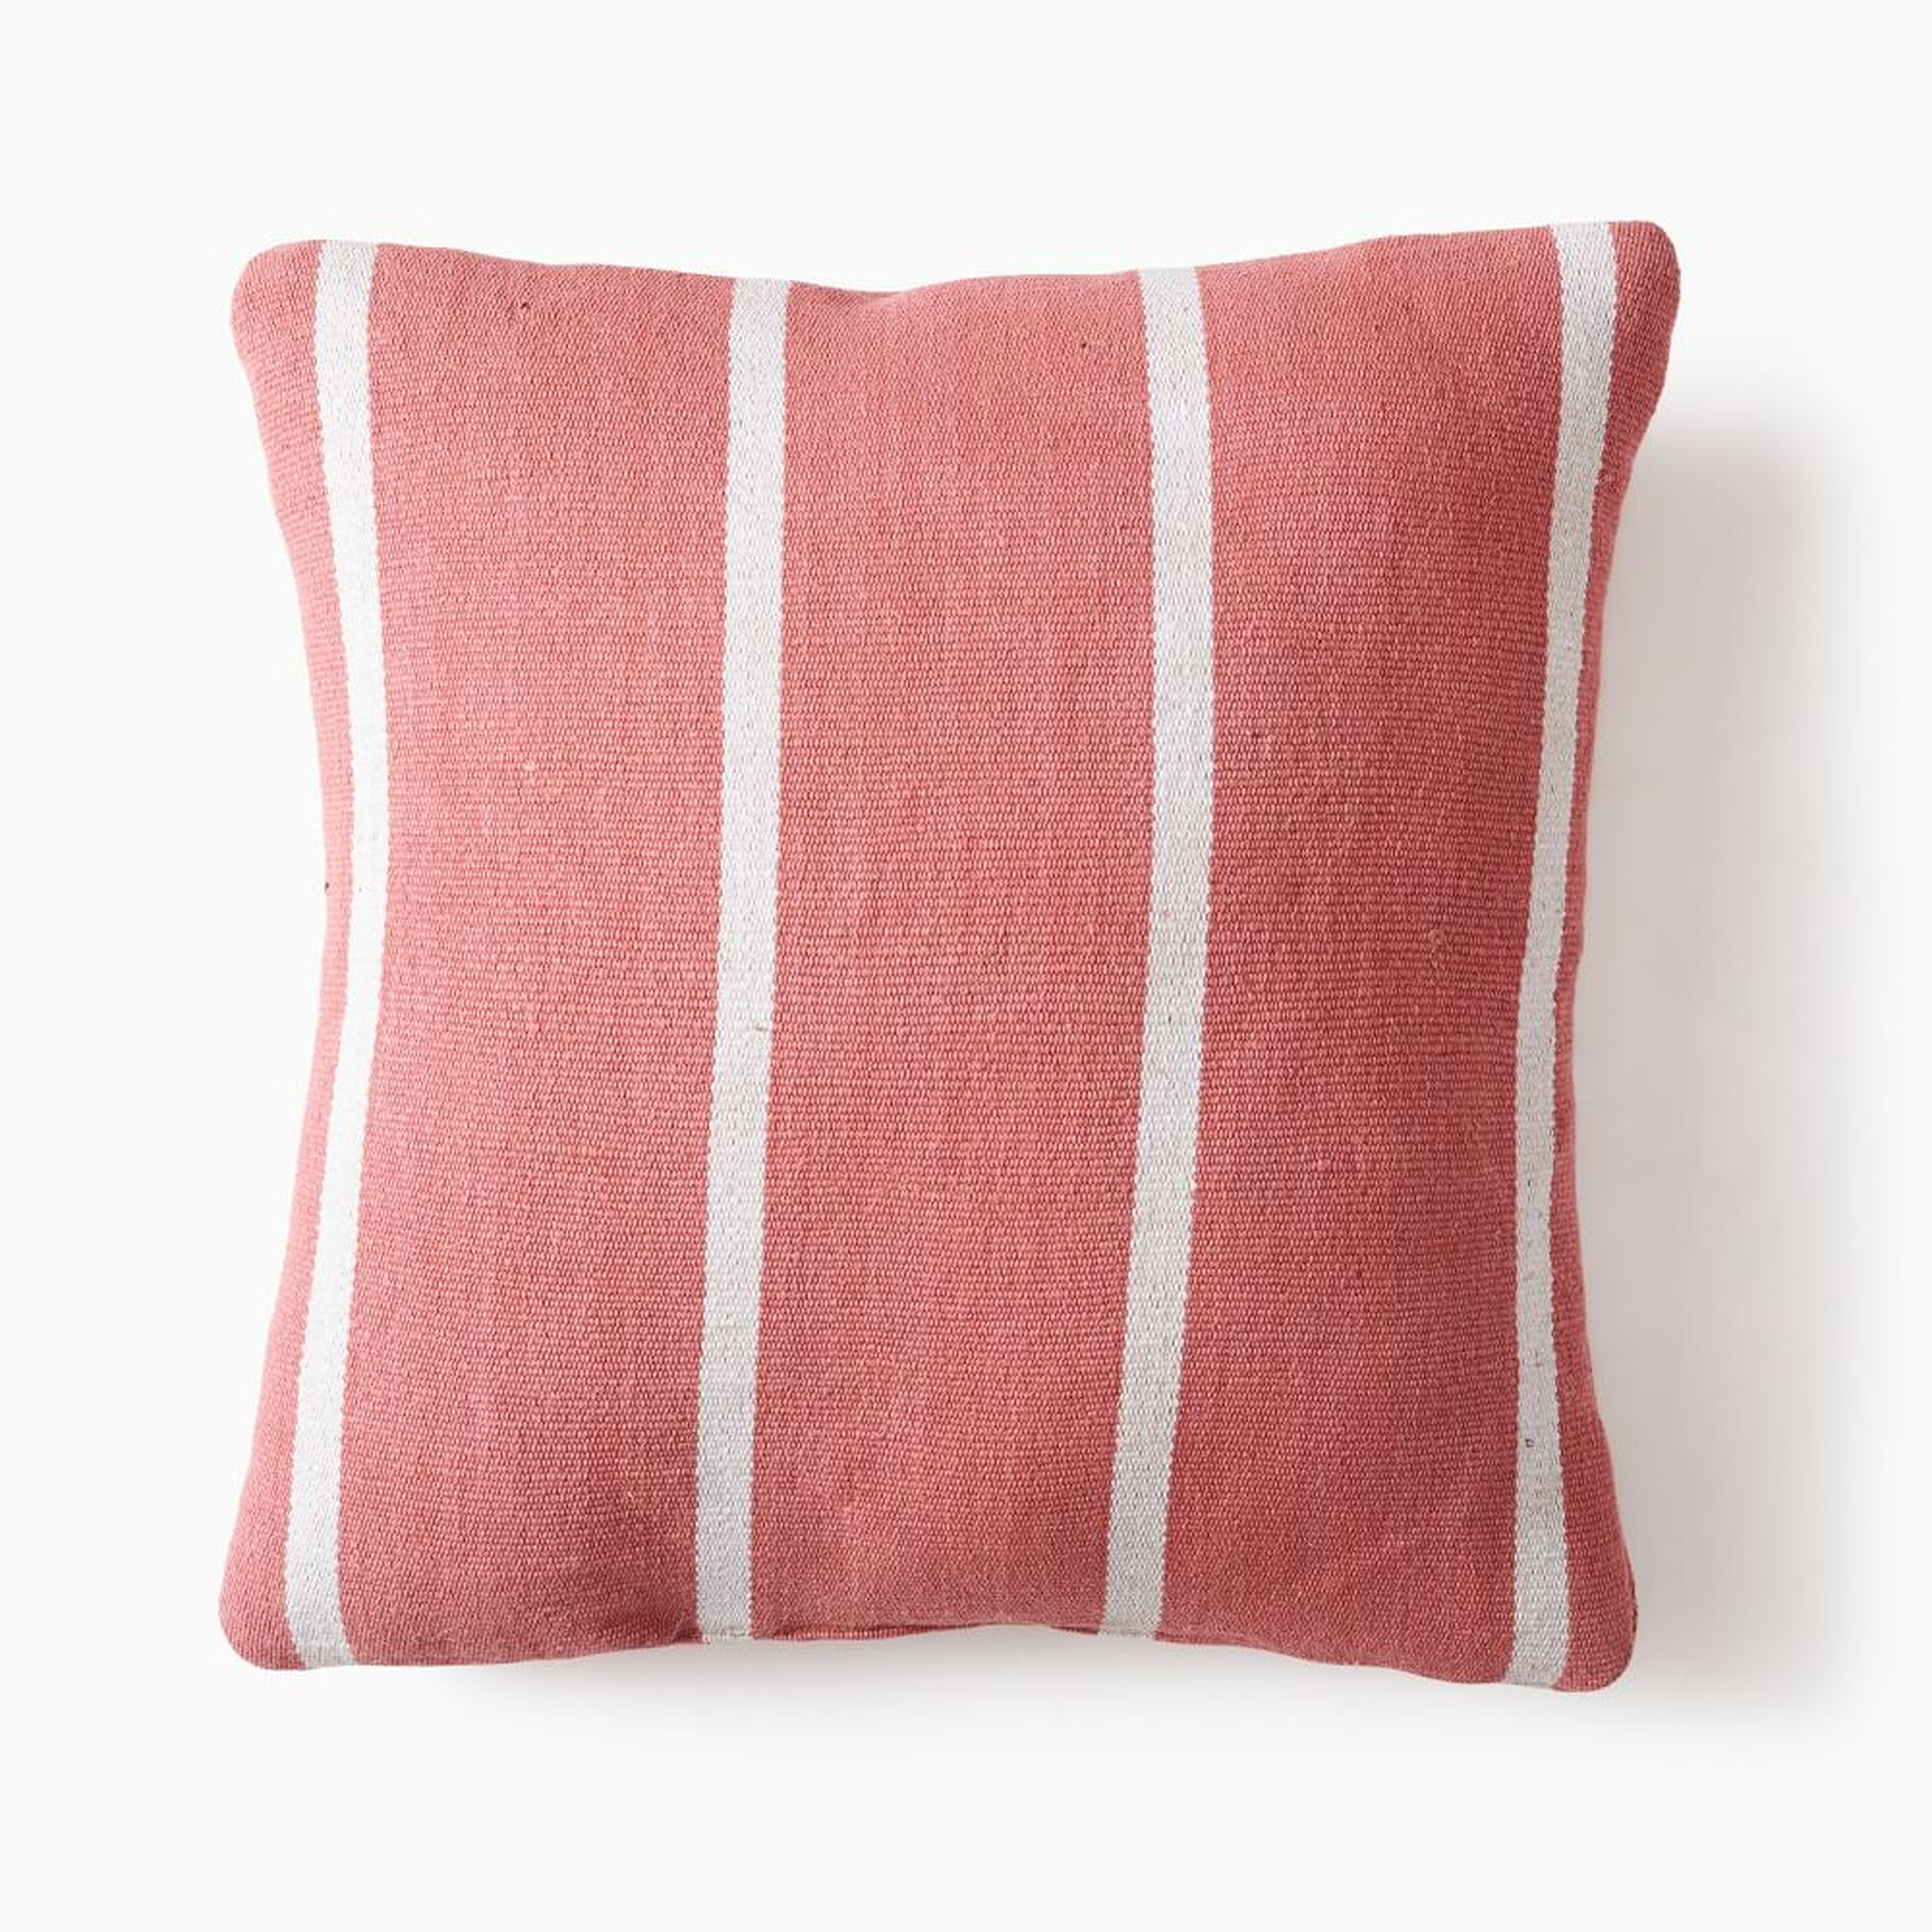 Outdoor Simple Stripe Pillow, 20"x20", Coral, Set of 2 - West Elm